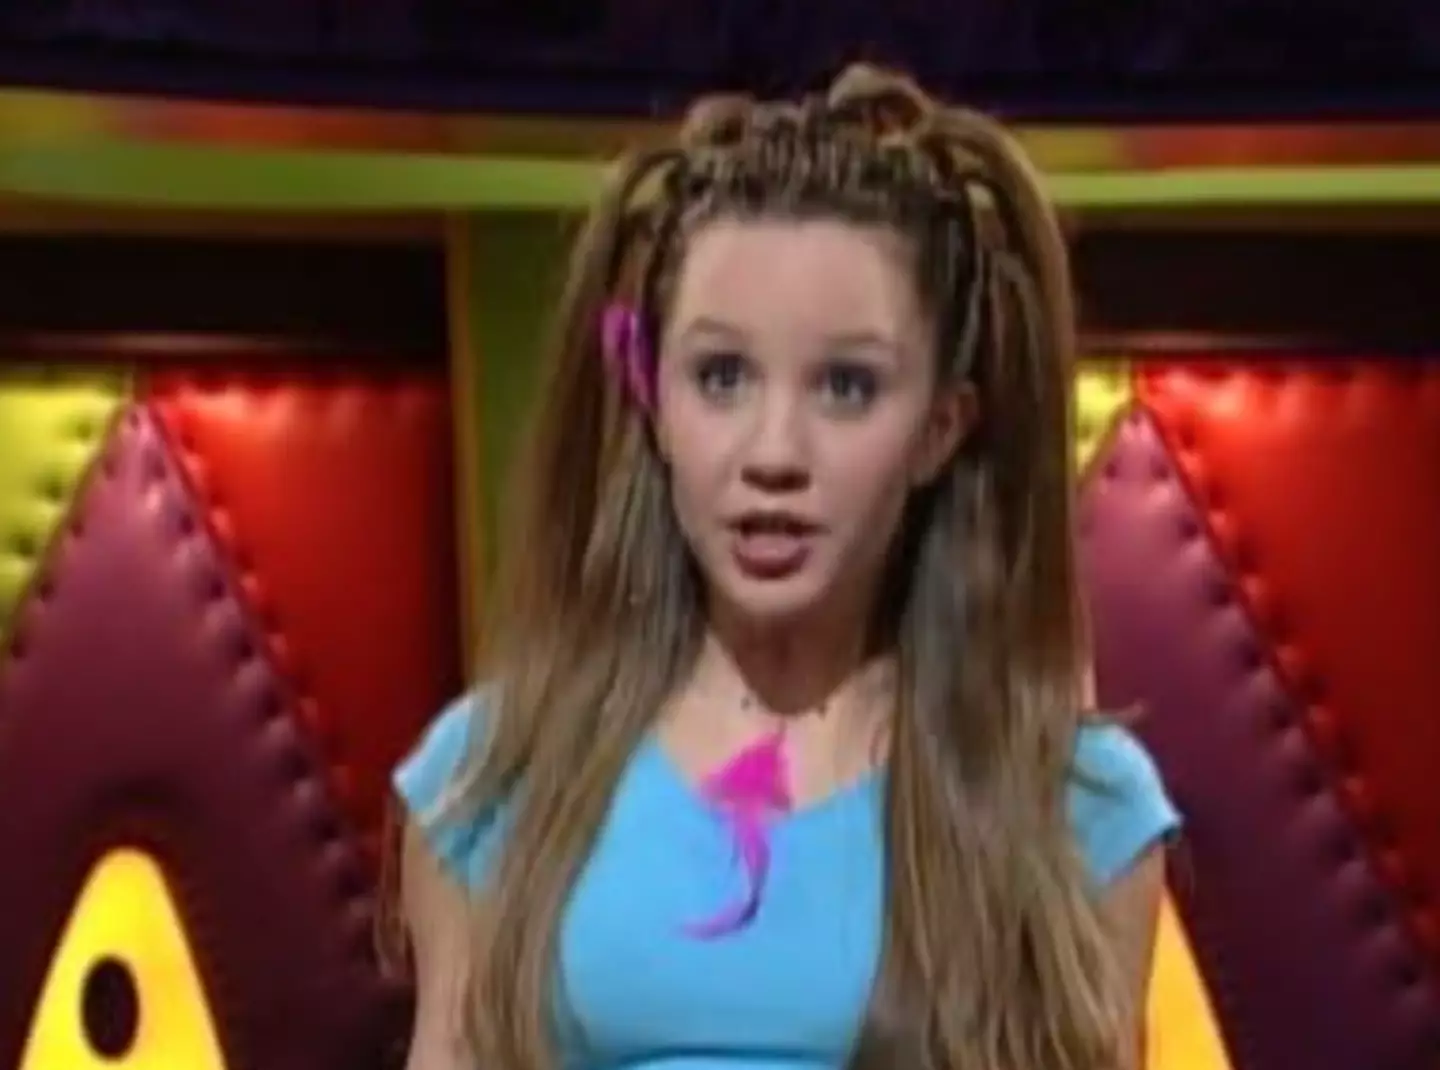 Amanda Bynes starred in the Amanda Show from 1999-2002.